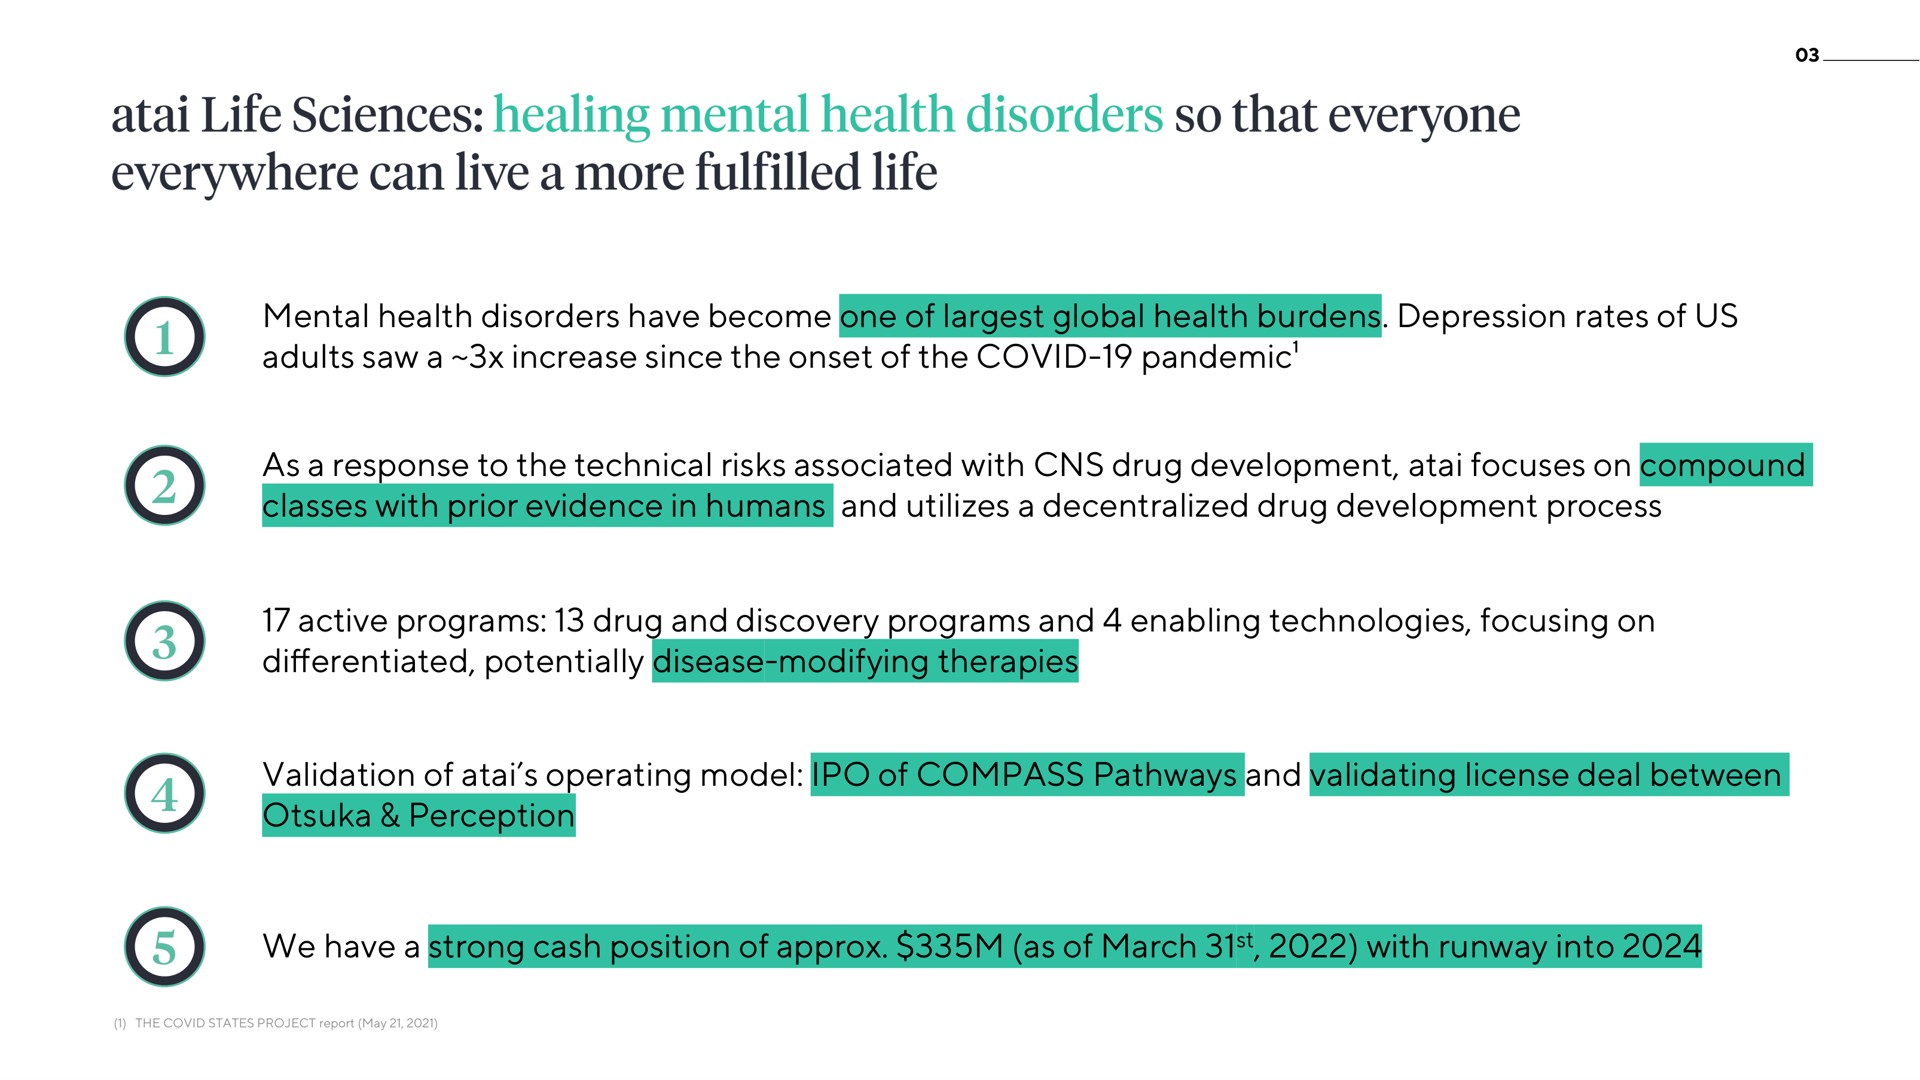 mental health disorders have become one of global health burdens depression rates of us adults saw a increase since the onset of the covid pandemic as a response to the technical risks associated with drug development focuses on compound classes with prior evidence in humans and utilizes a decentralized drug development process active programs drug and discovery programs and enabling technologies focusing on potentially disease modifying therapies validation of operating model of compass pathways and validating license deal between perception we have a strong cash position of as of march with runway into life sciences healing so that everyone everywhere can live more life | ATAI